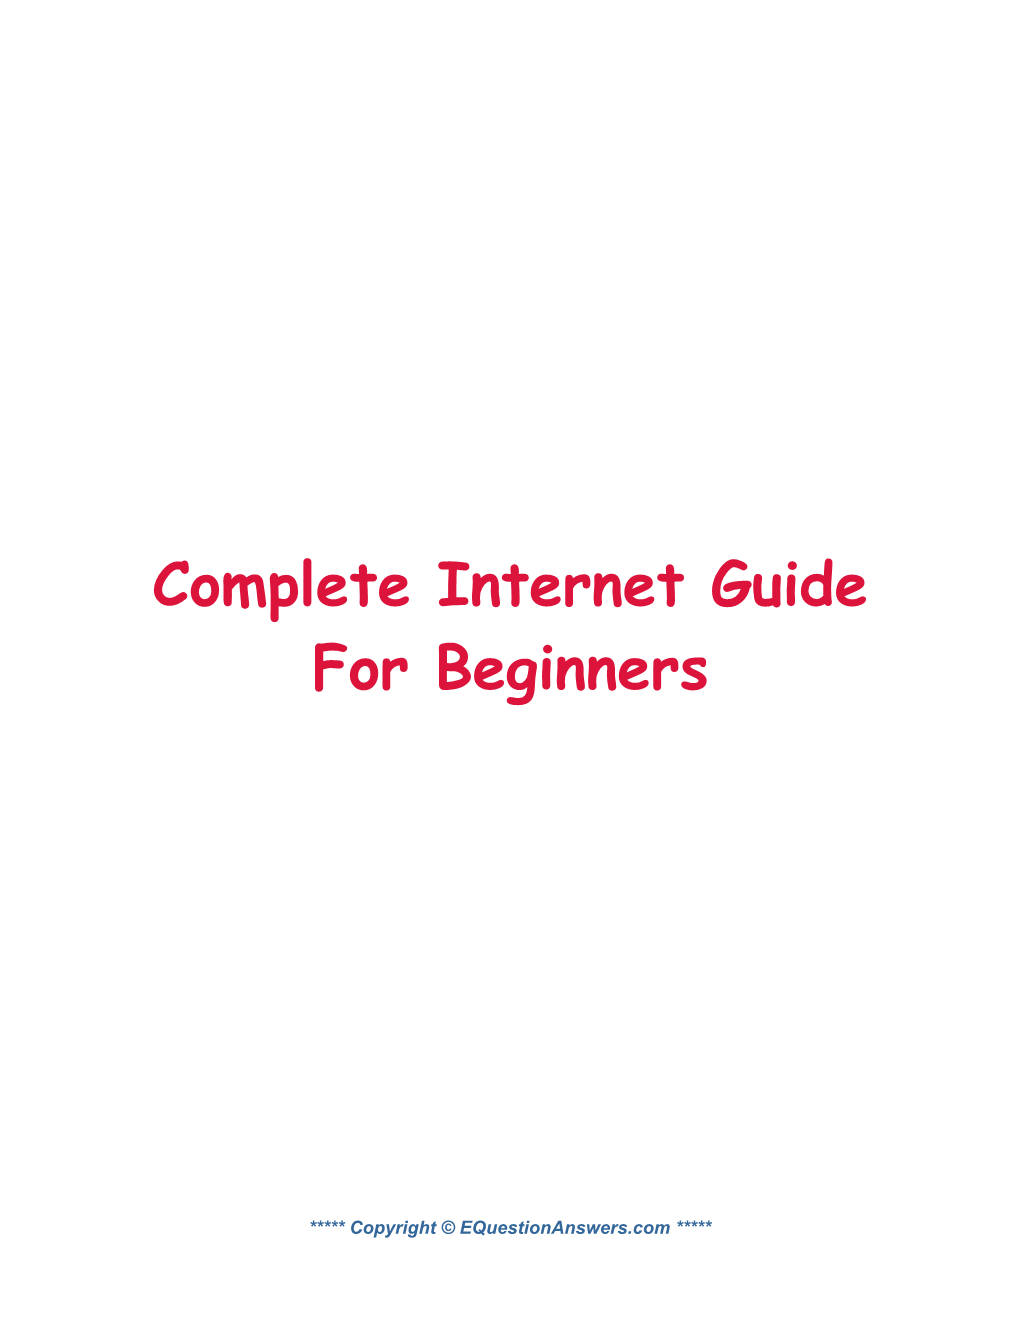 Complete Internet Guide